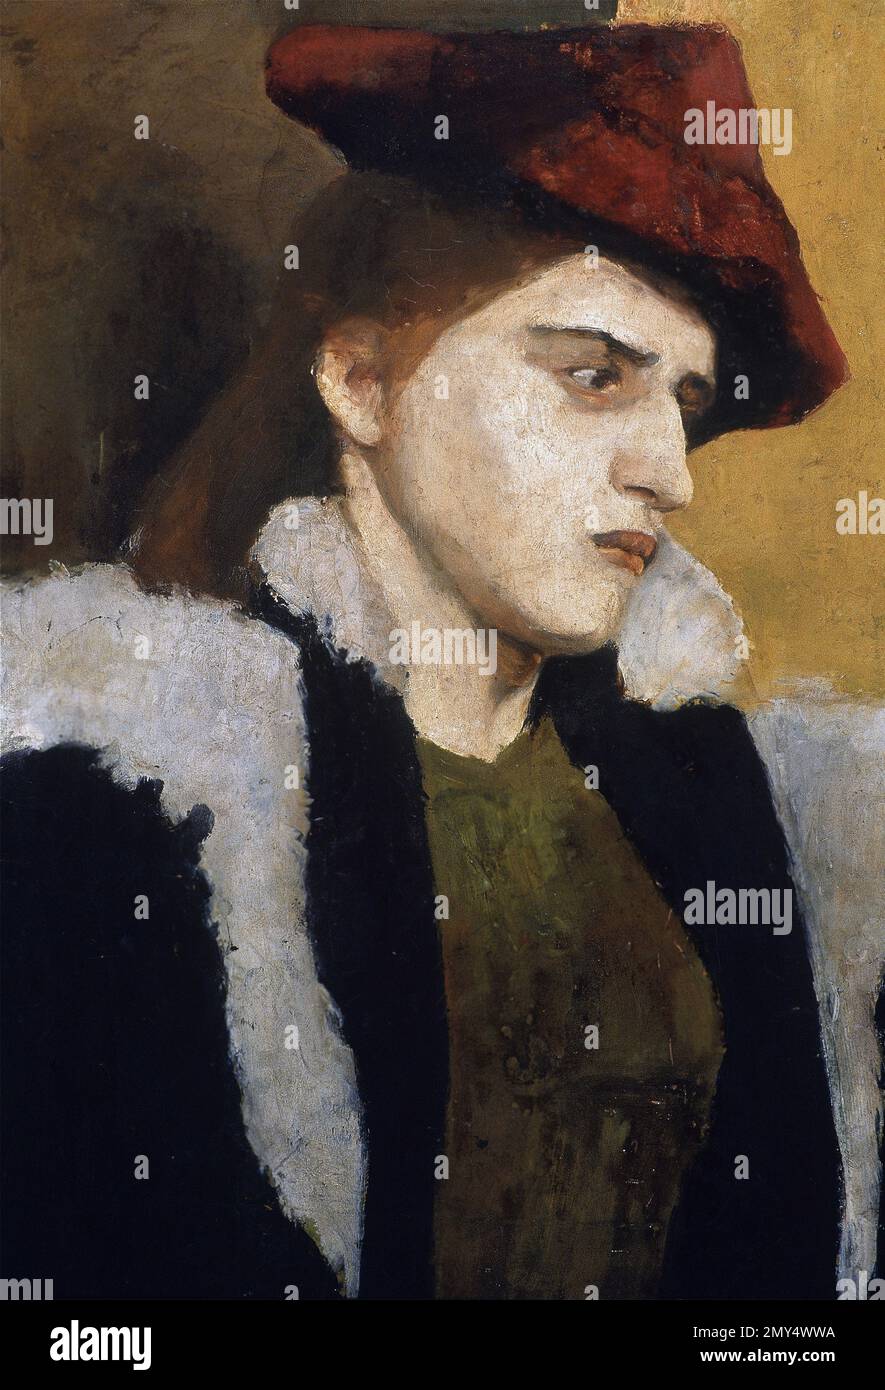 Paula Modersohn-Becker. Painting entitled 'Portrait of a Young Woman with Red Hat' by the German Expressionist painter, Paula Modersohn-Becker (1876-1907), c. 1900 Stock Photo